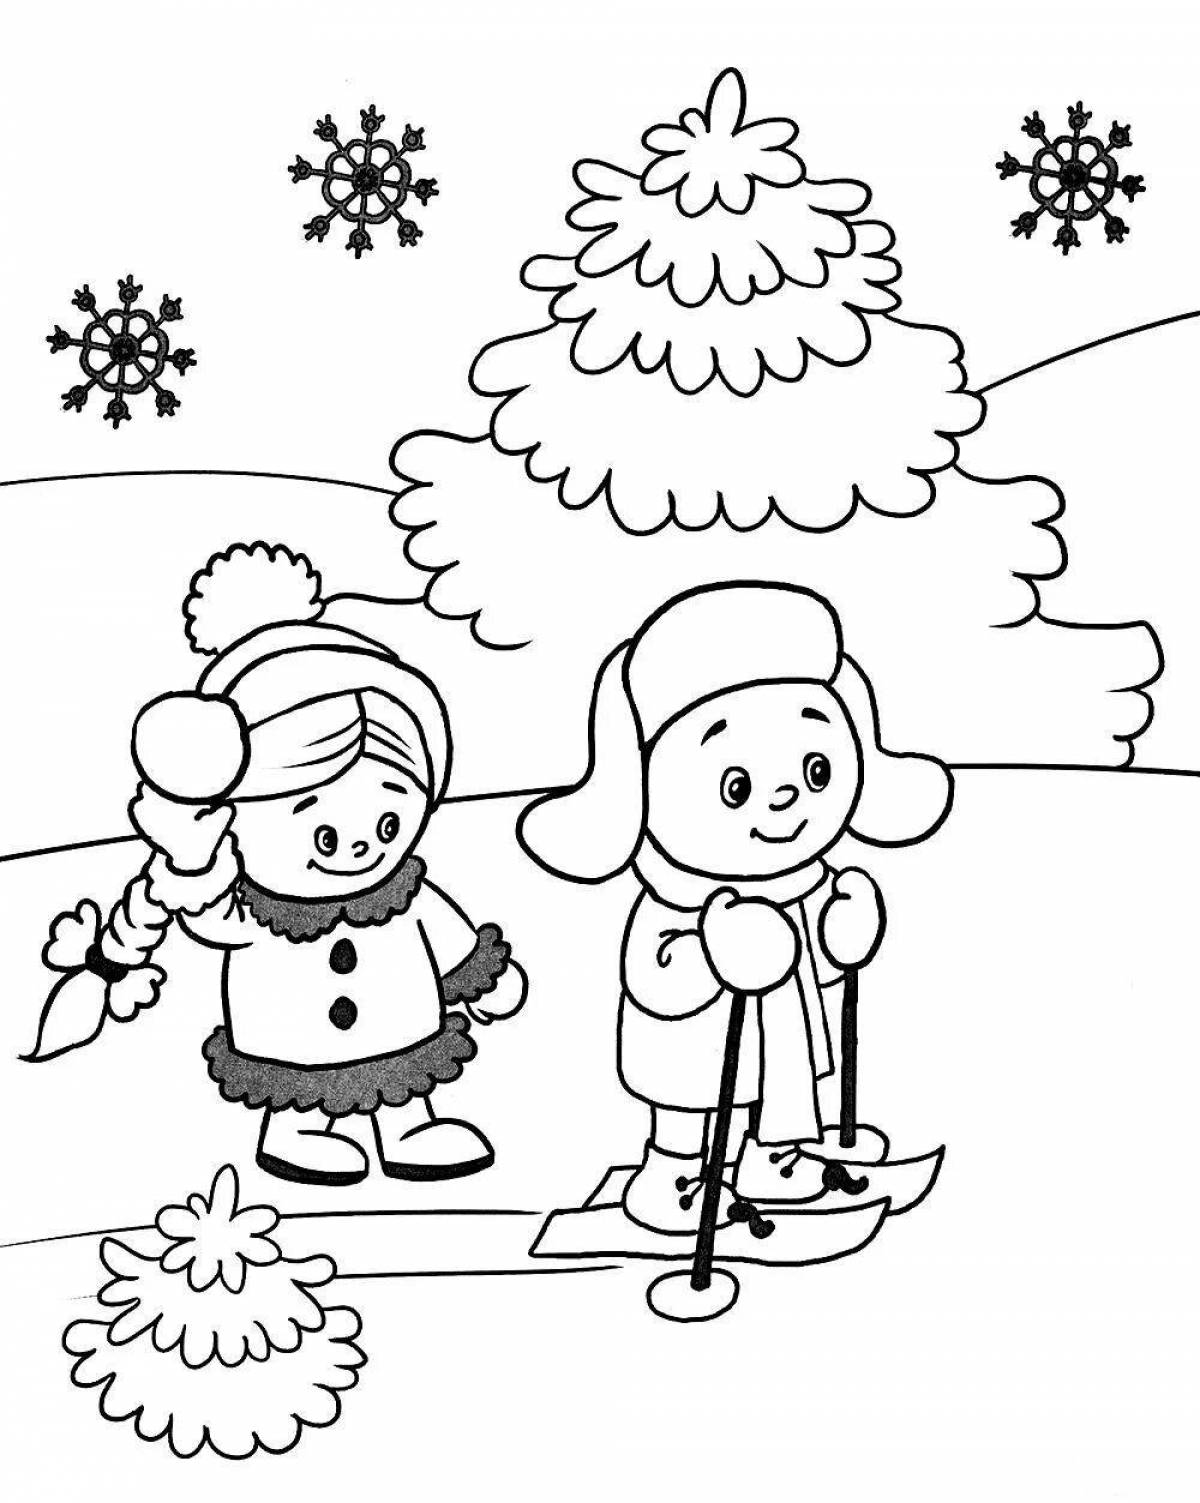 5 Years of Winter Inspirational Coloring Page